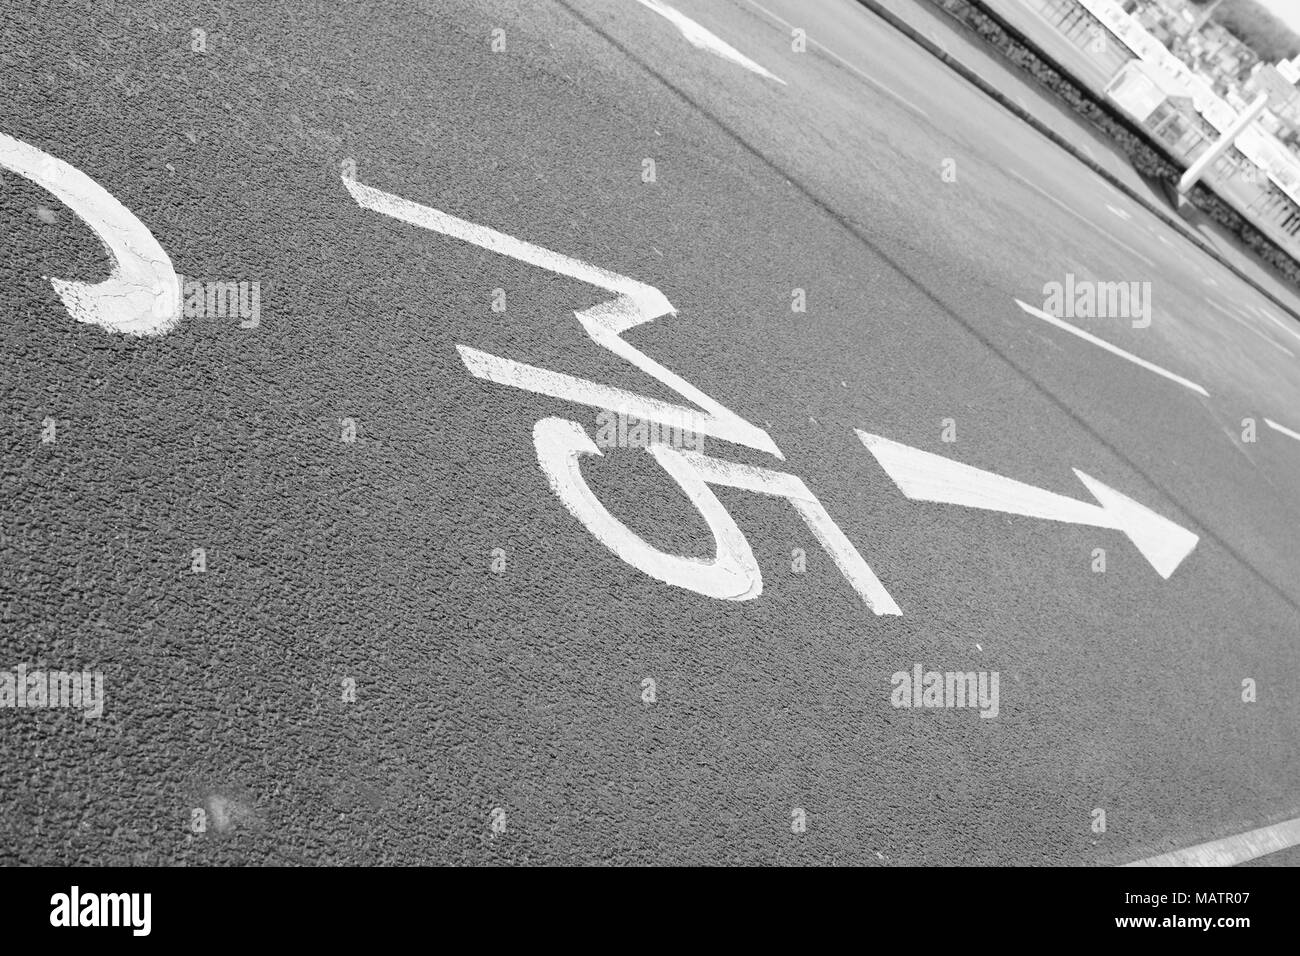 Road markings showing the way to the M5 motorway - black and white image Stock Photo